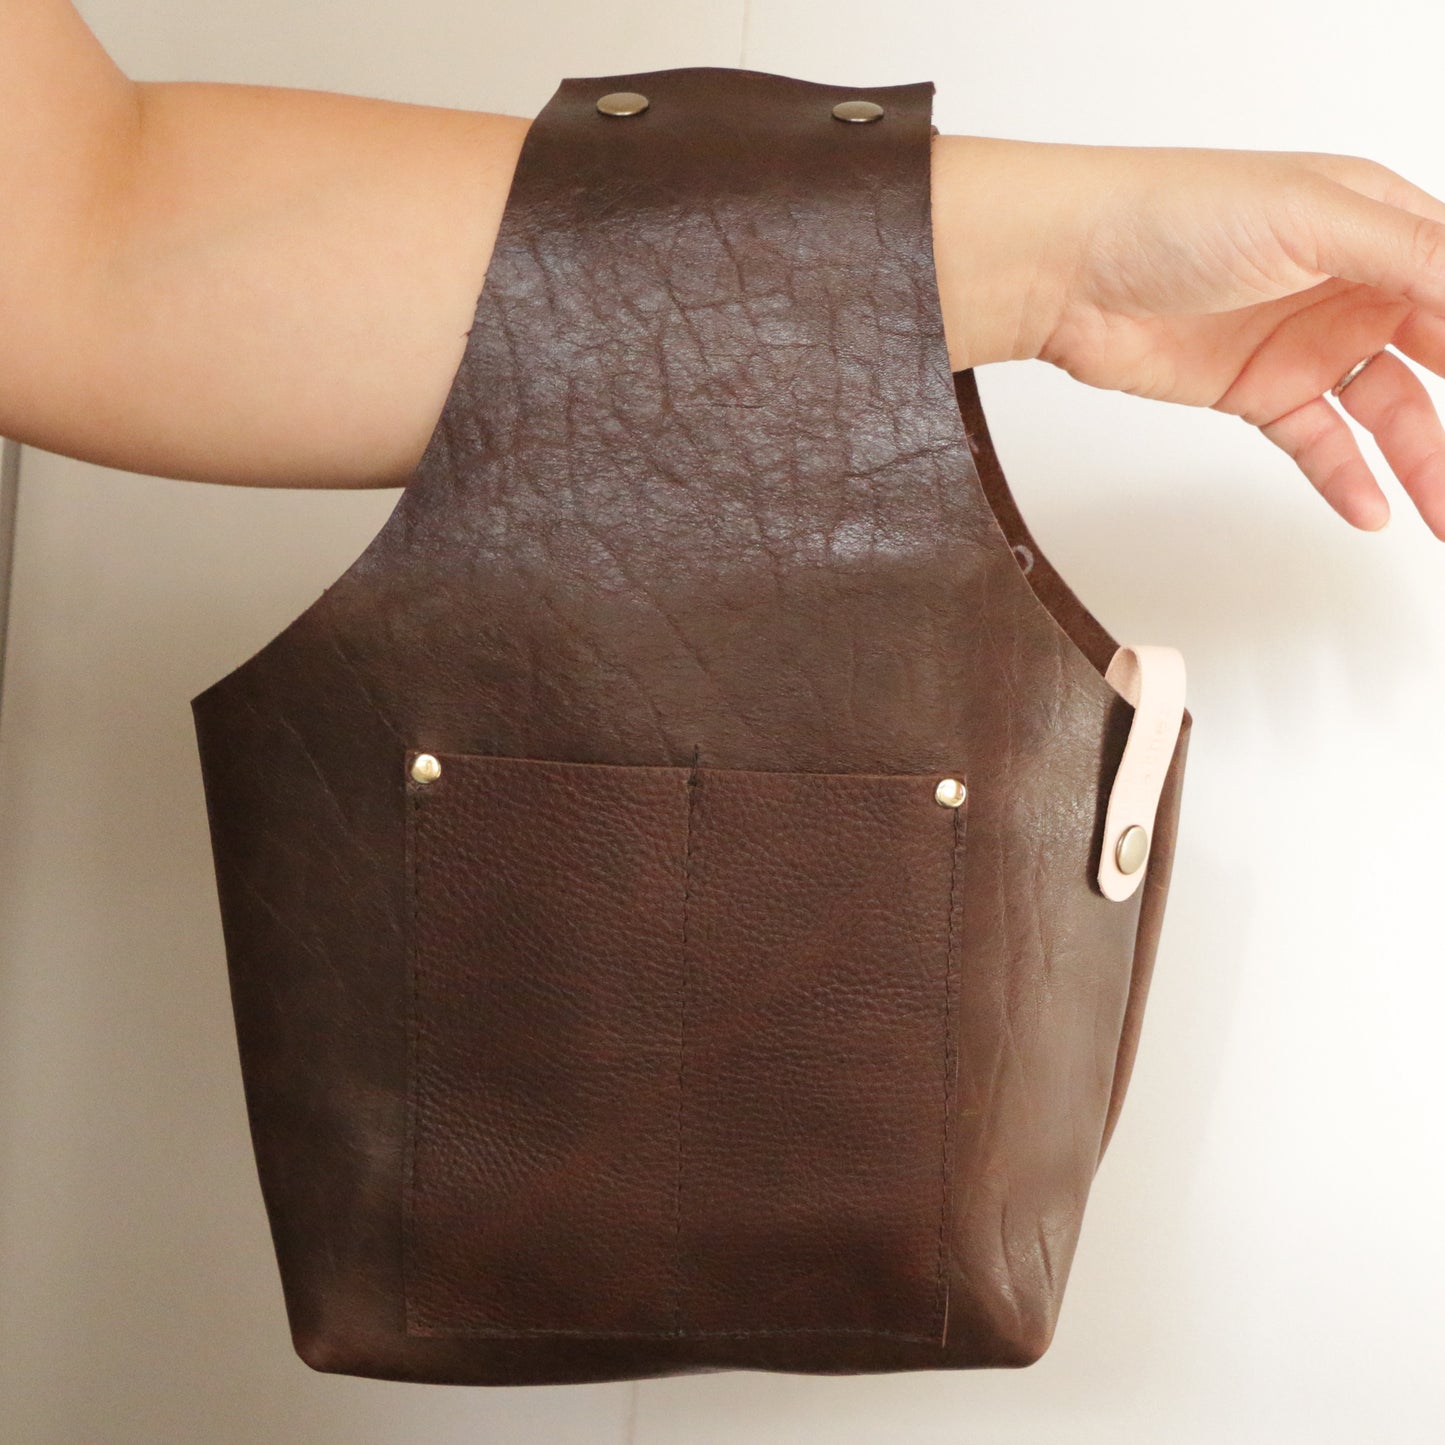 Arm Sling Bags - Her Leather Co.